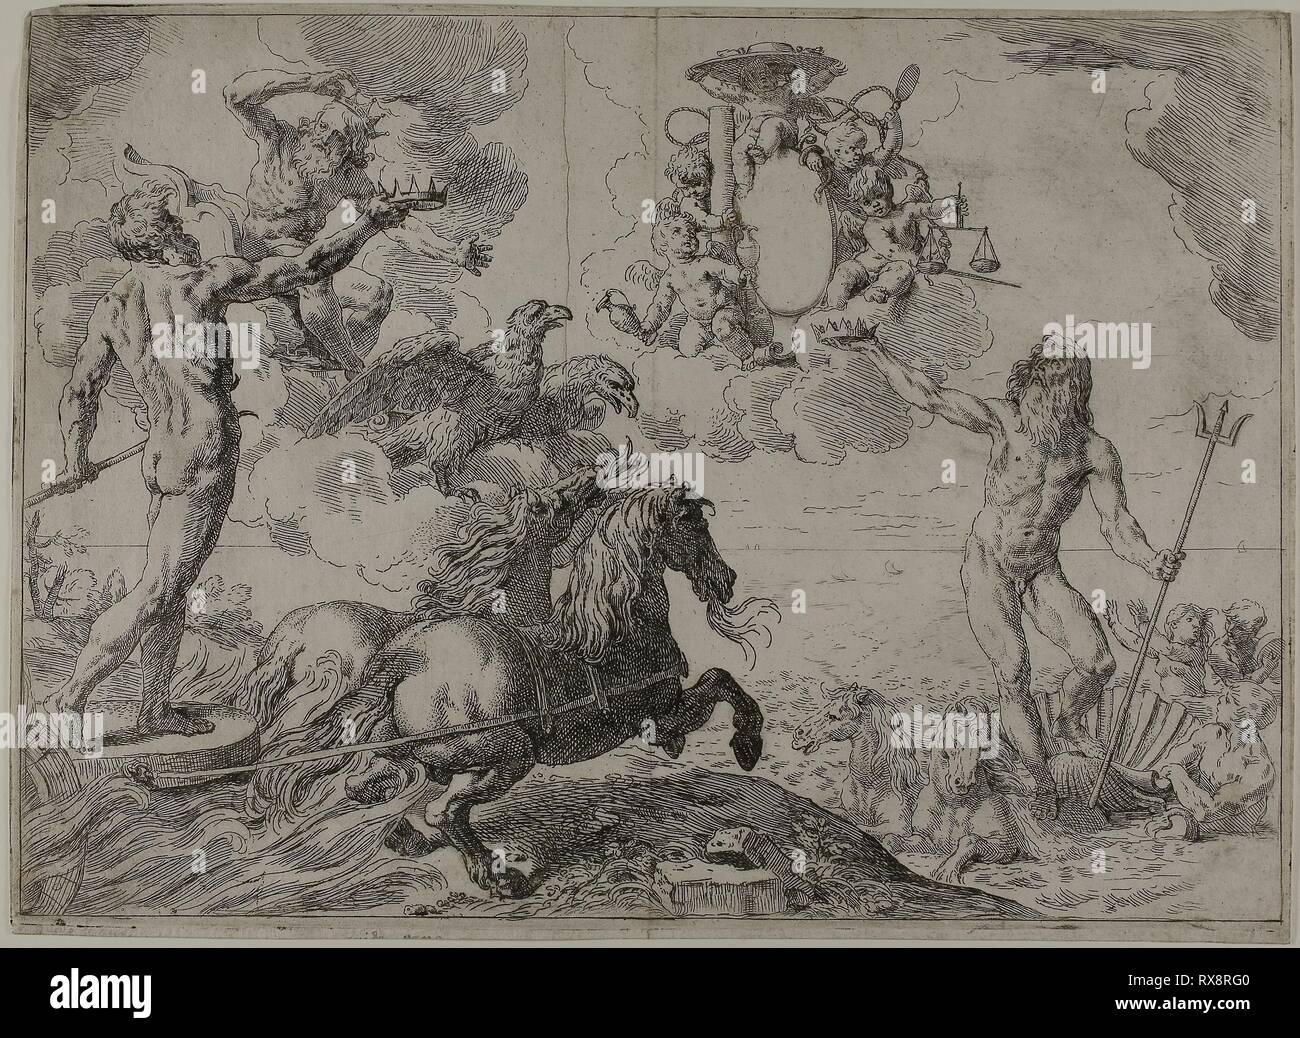 Jupiter, Neptune and Pluto Offering their Crowns to the Arms of Cardinal Borghese. Simone Cantarini; Italian, 1612-1648. Date: 1640-1645. Dimensions: 310 x 435 mm (image); 315 x 440 mm (plate); 320 x 440 mm (sheet). Etching on ivory laid paper. Origin: Italy. Museum: The Chicago Art Institute. Stock Photo